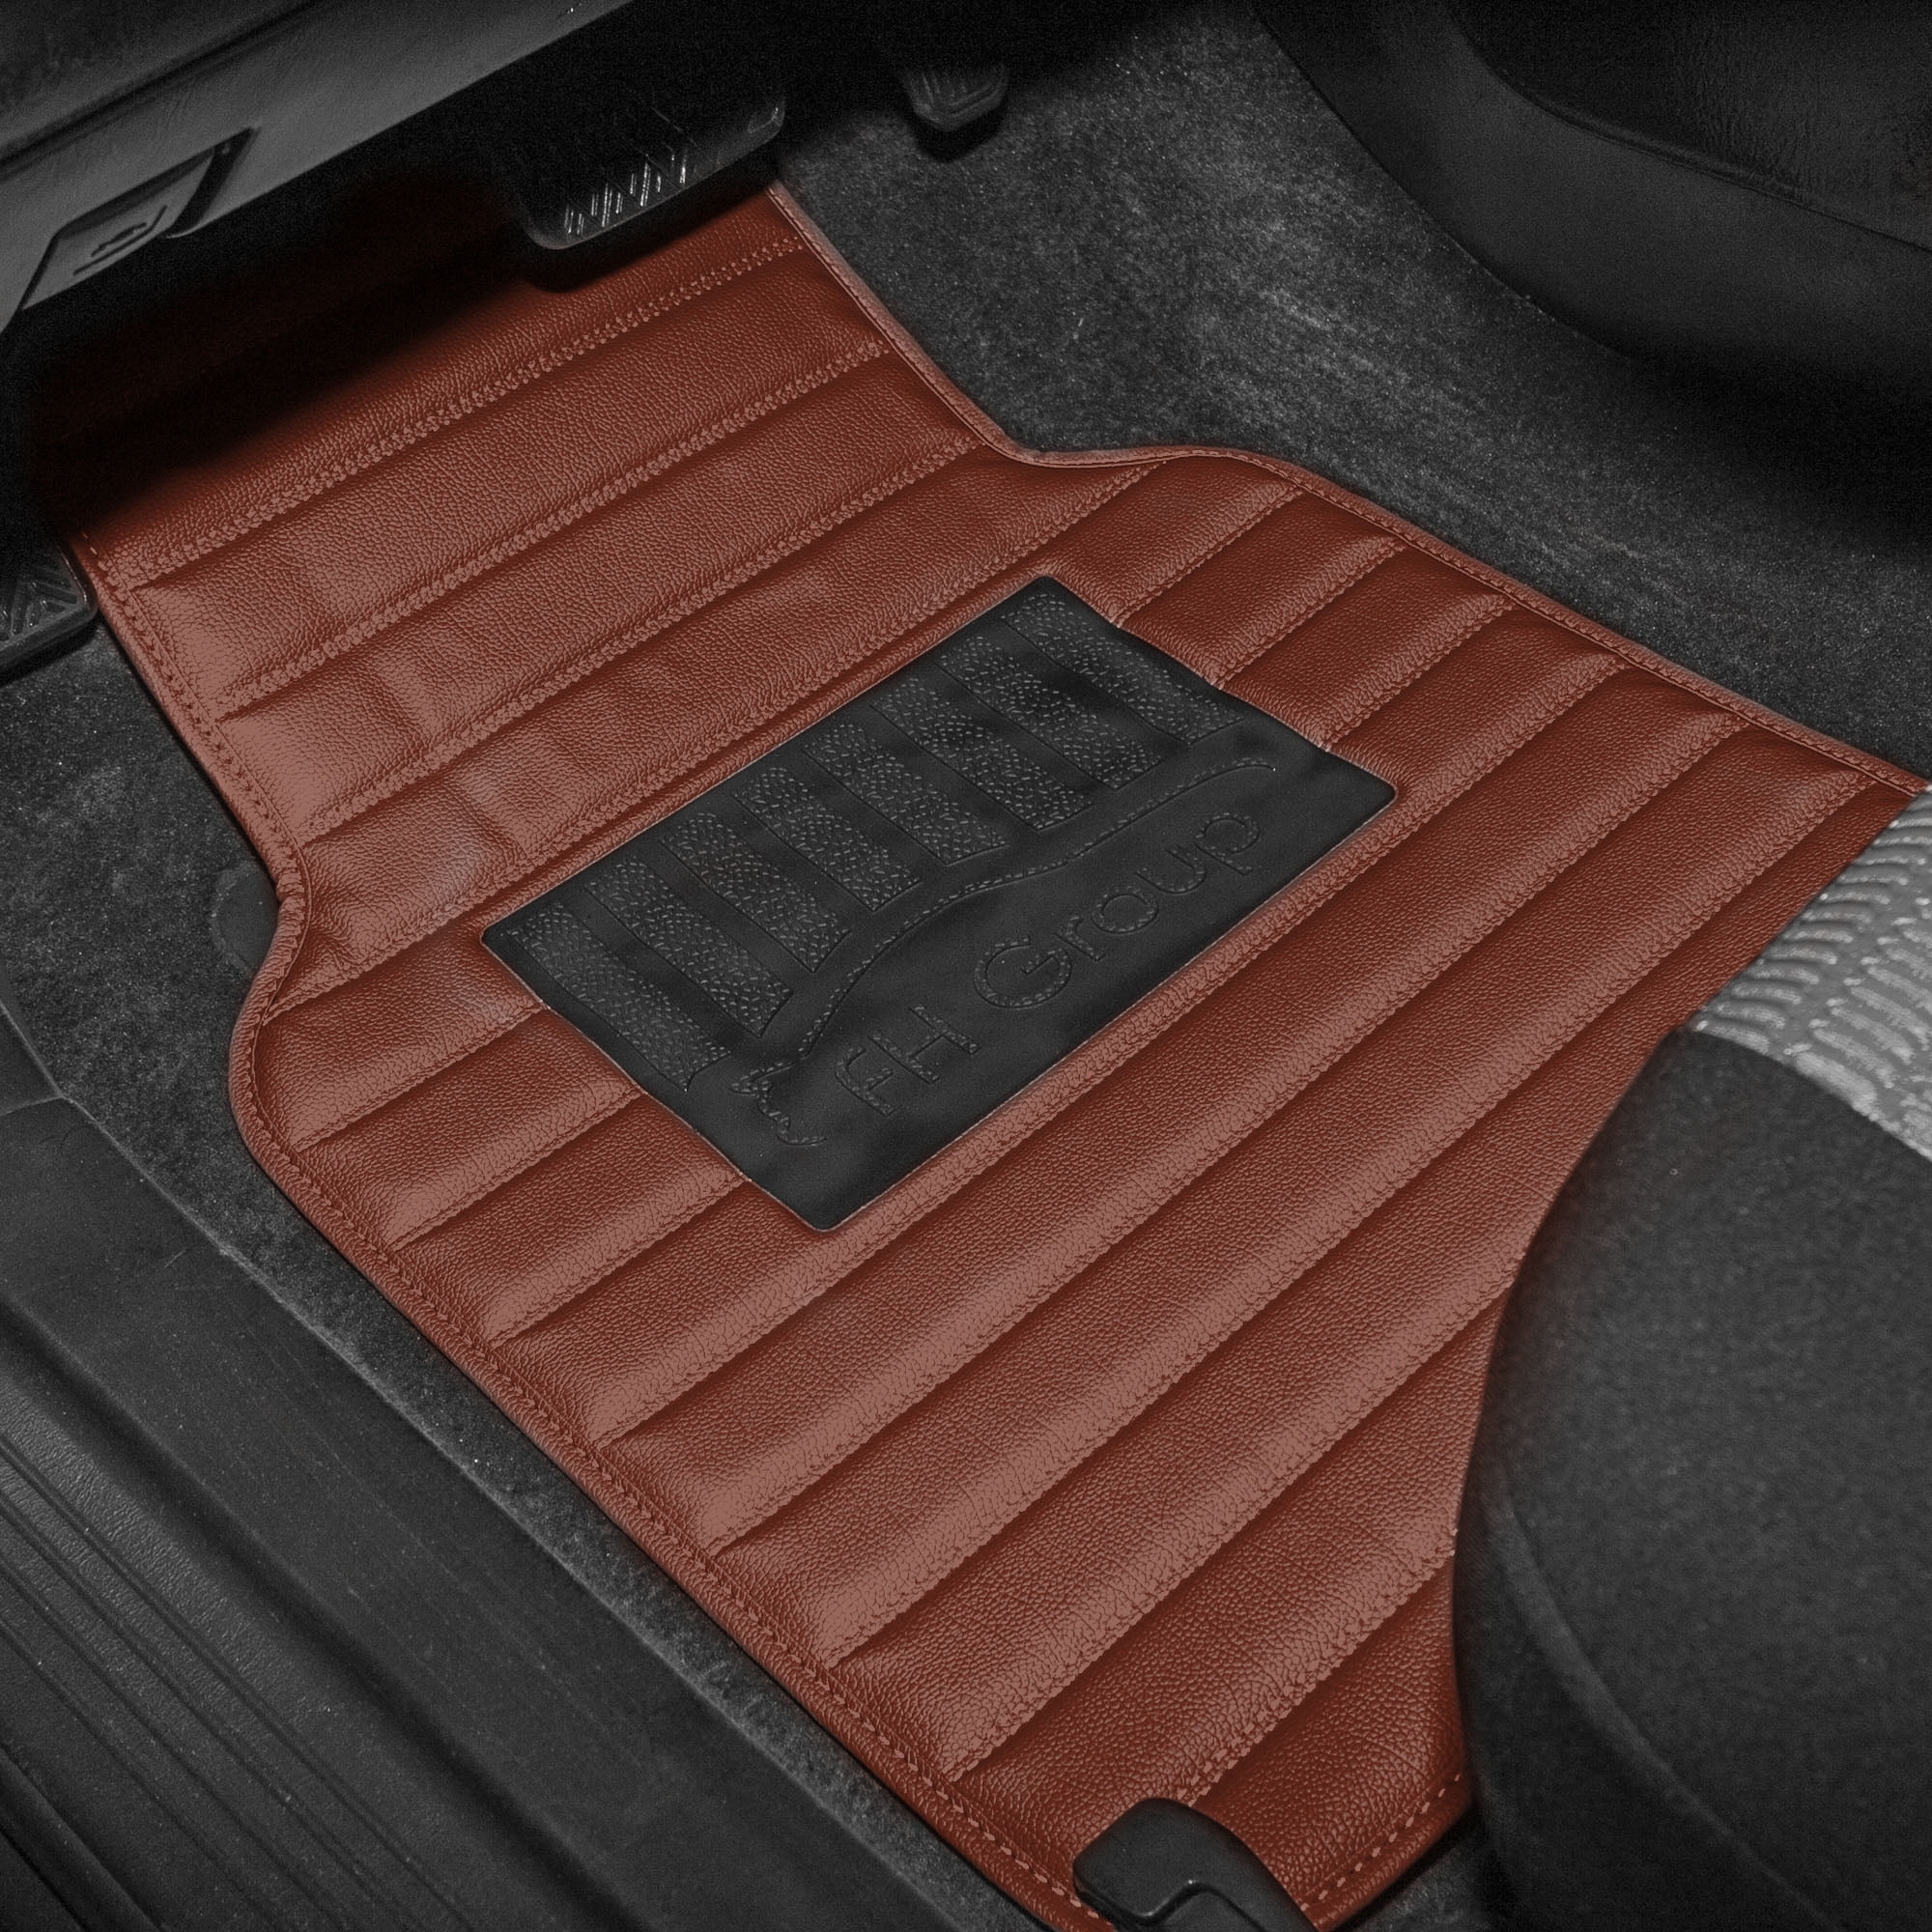 Fh Group Universal Leather Car Floor Mats For Car Suv Van Anti